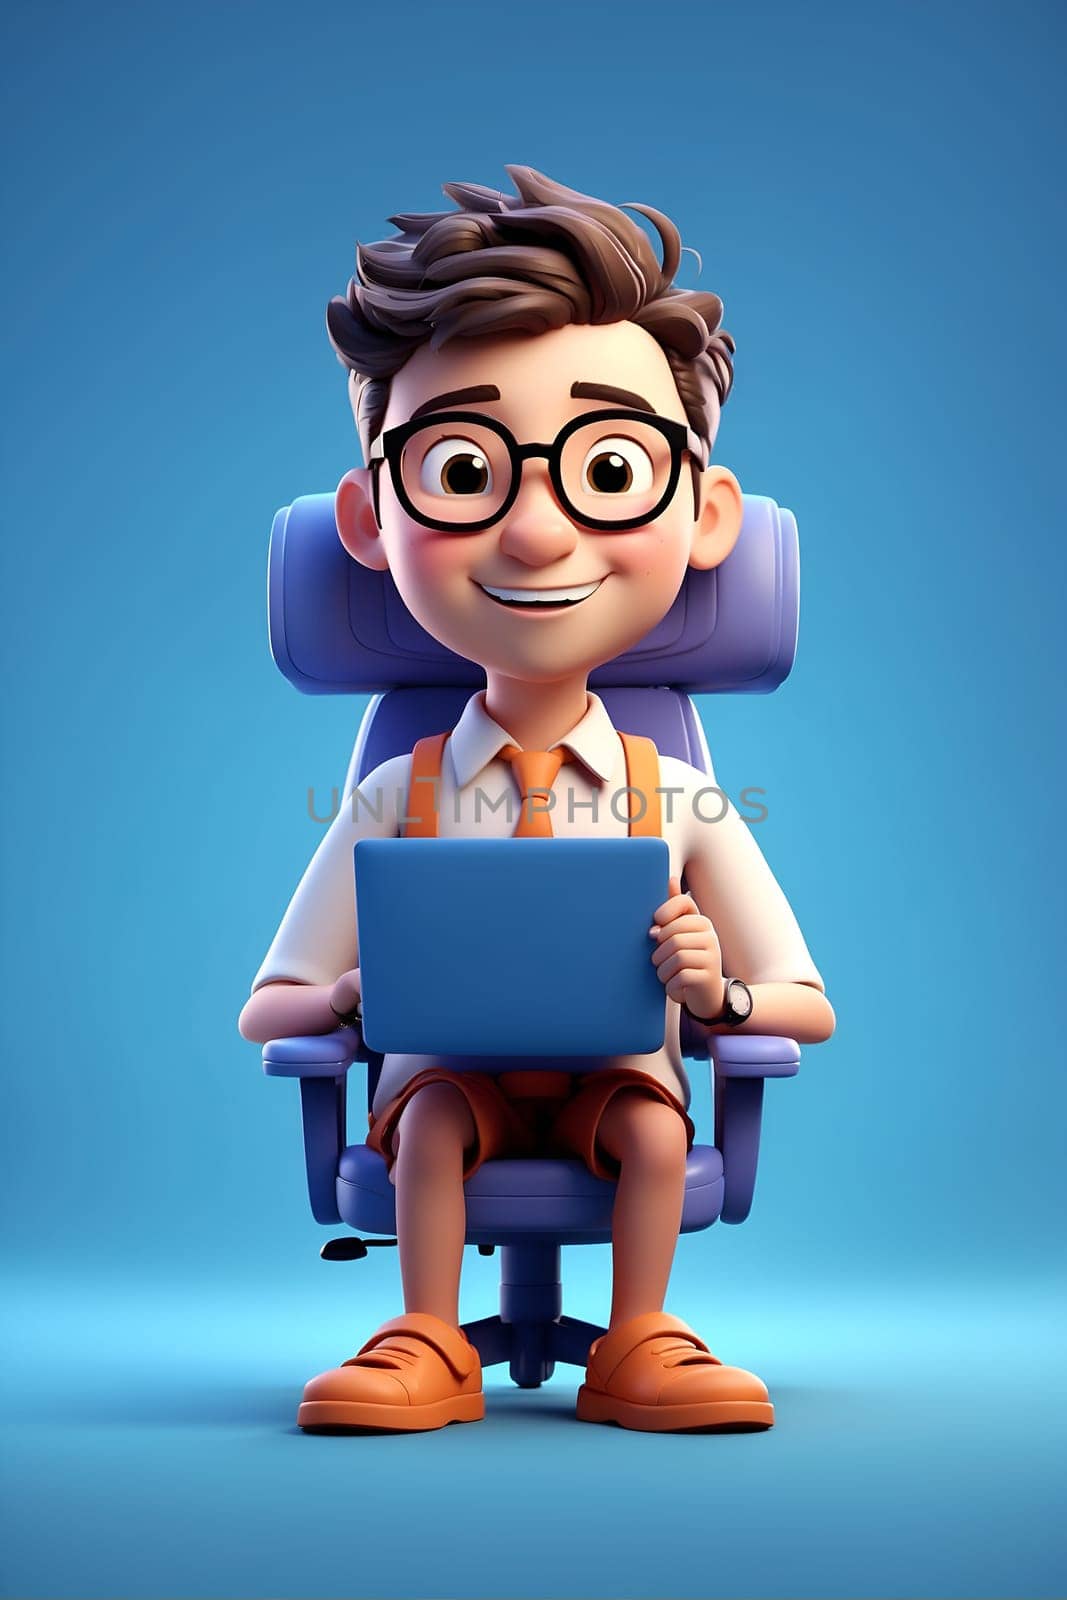 A cartoon character sits in a chair, using a laptop.